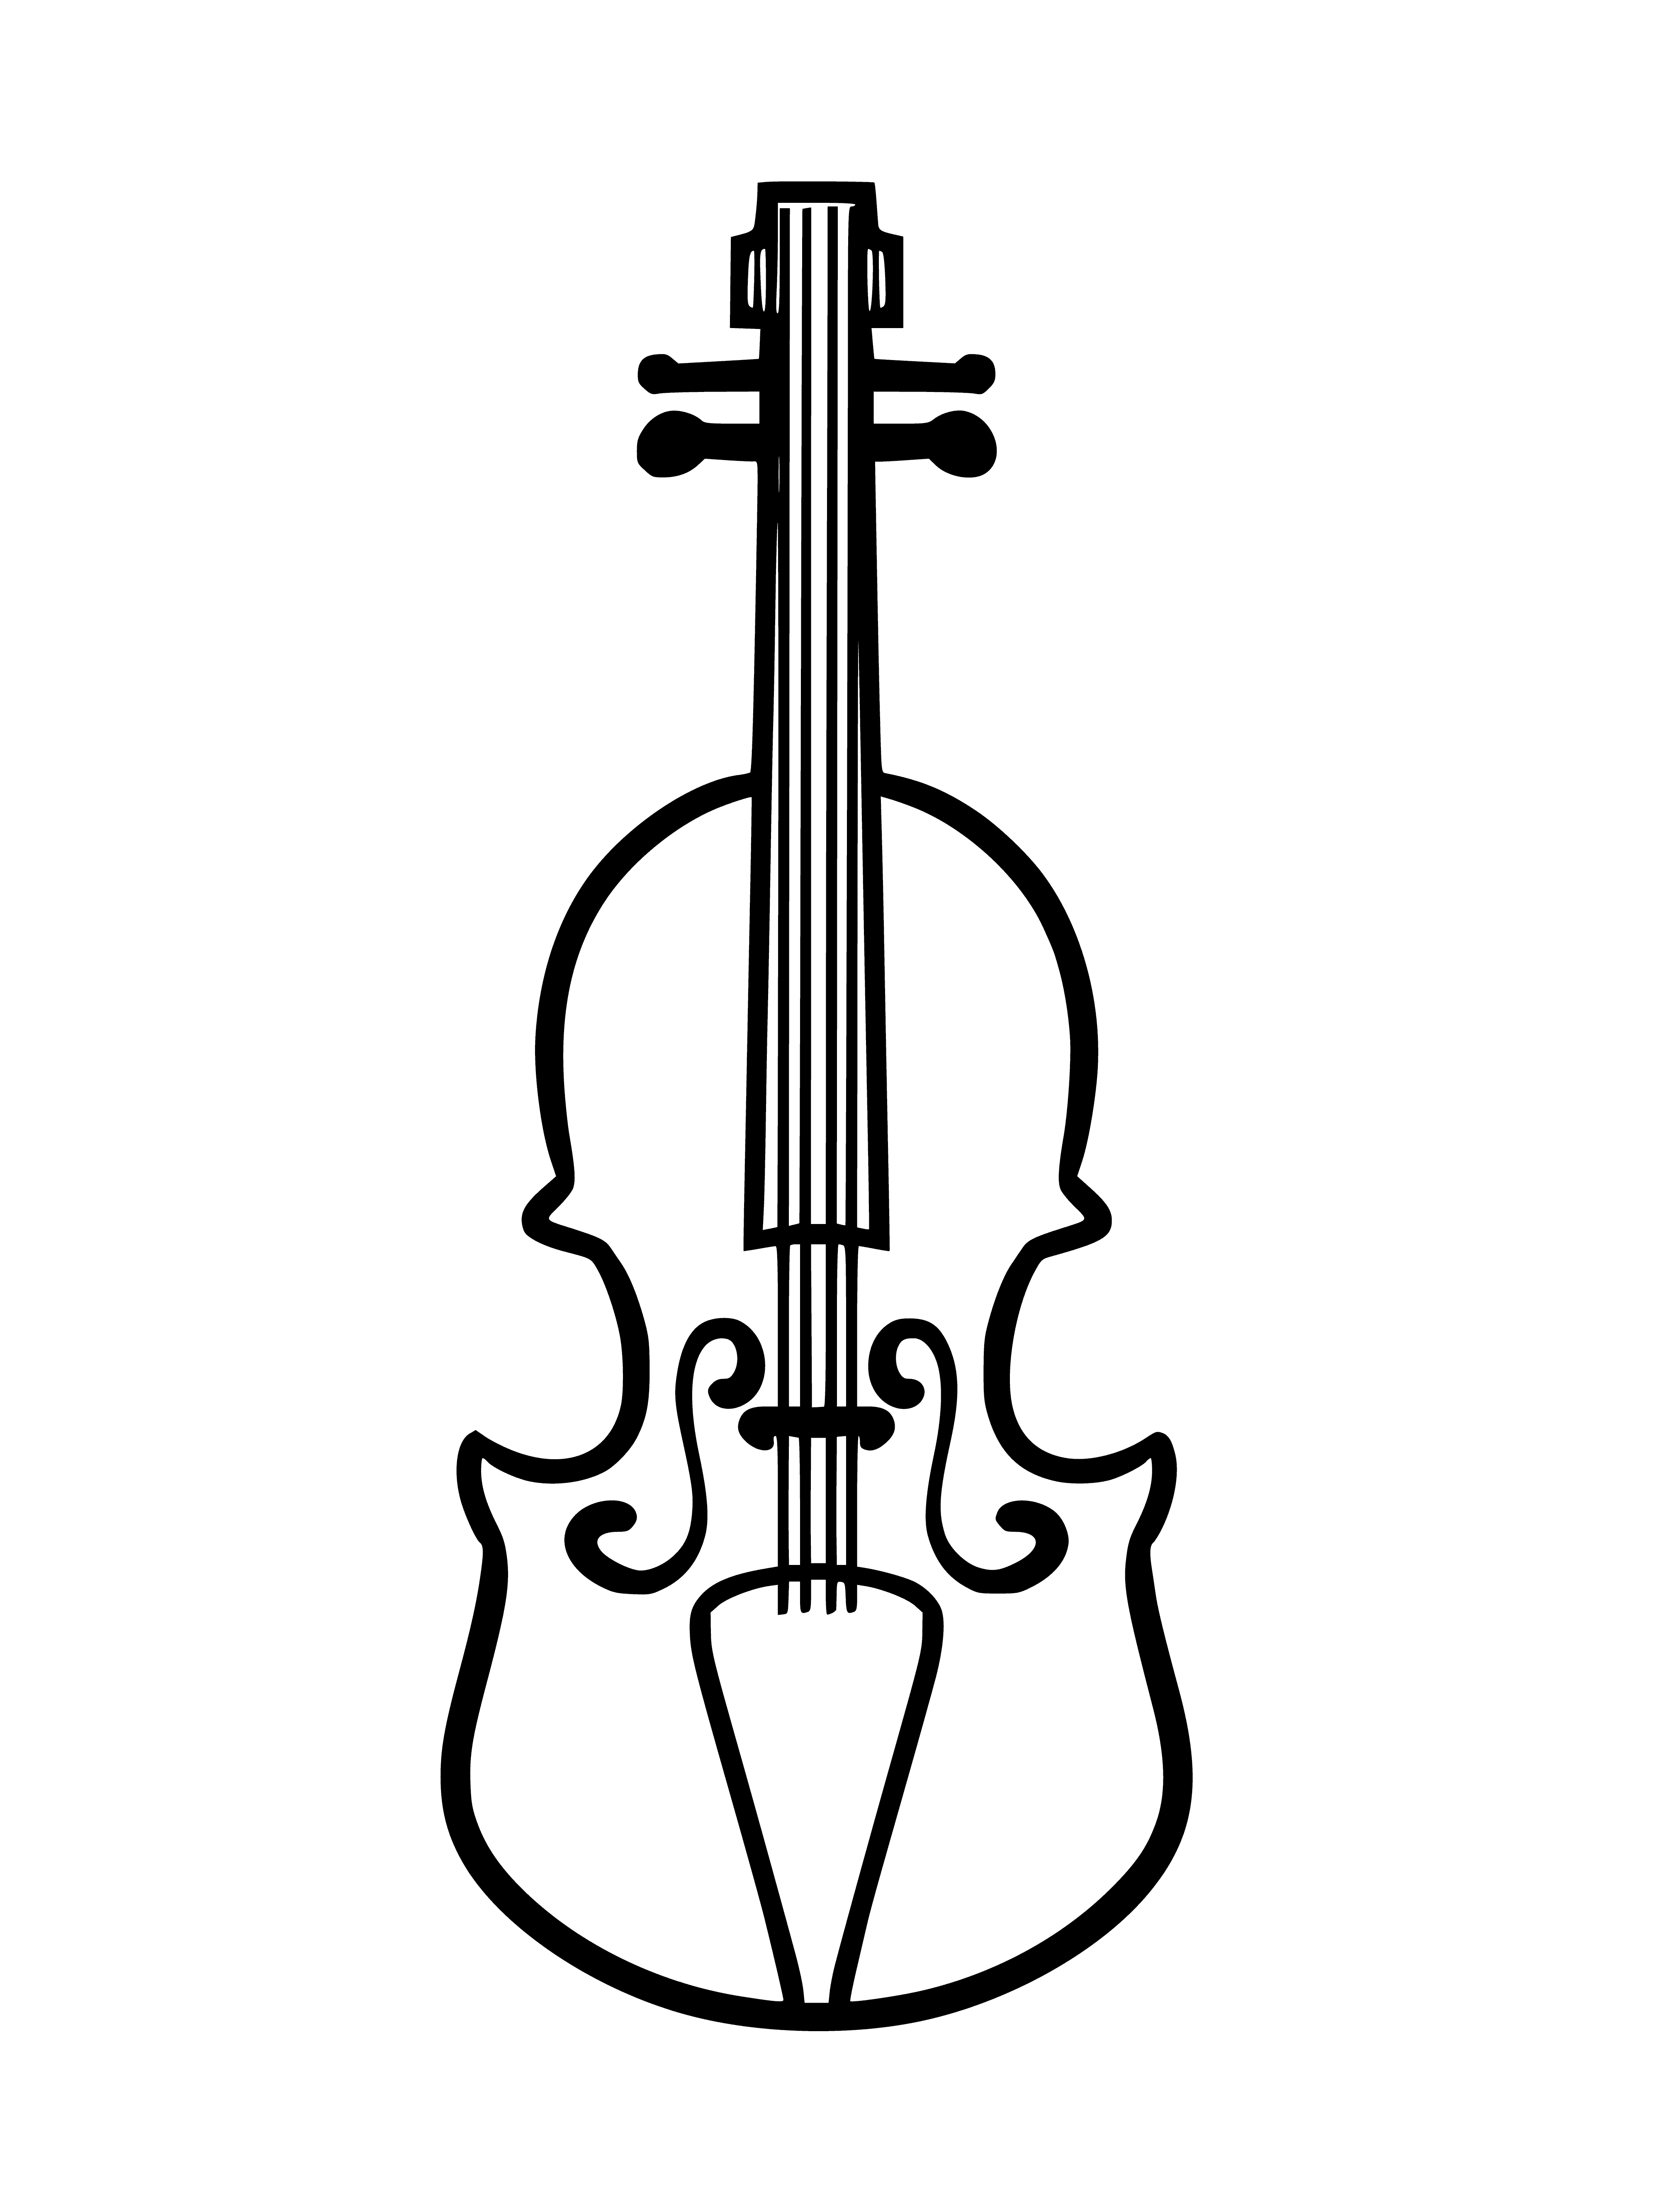 coloring page: Violin has long thin body, 4 strings, held under chin, played with bow. Strings made of gut or metal, vibrate to create beautiful, haunting sound.